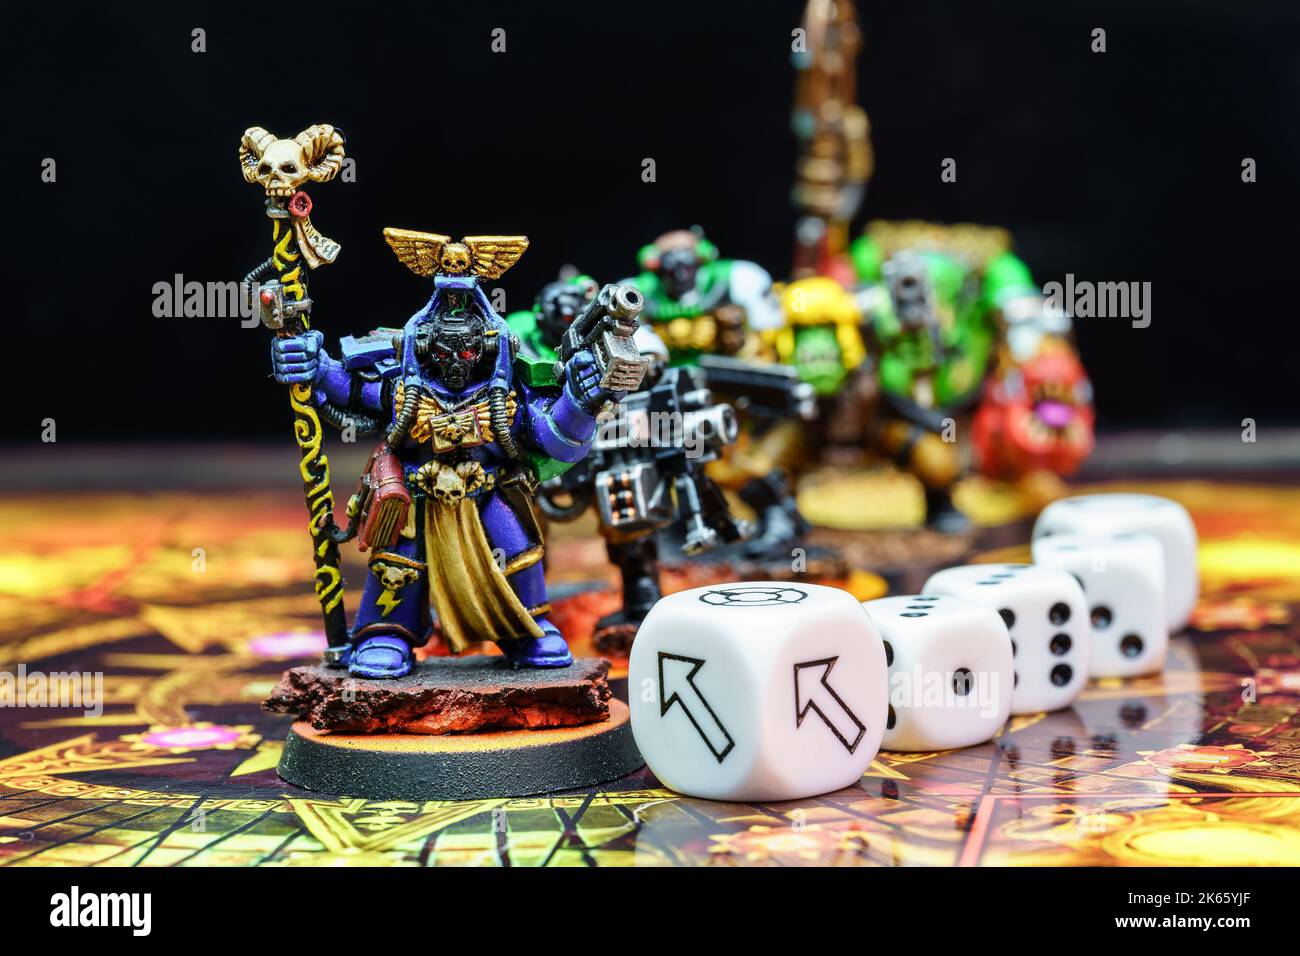 Figures of role-playing board games, dice and board to play in between several players. Stock Photo